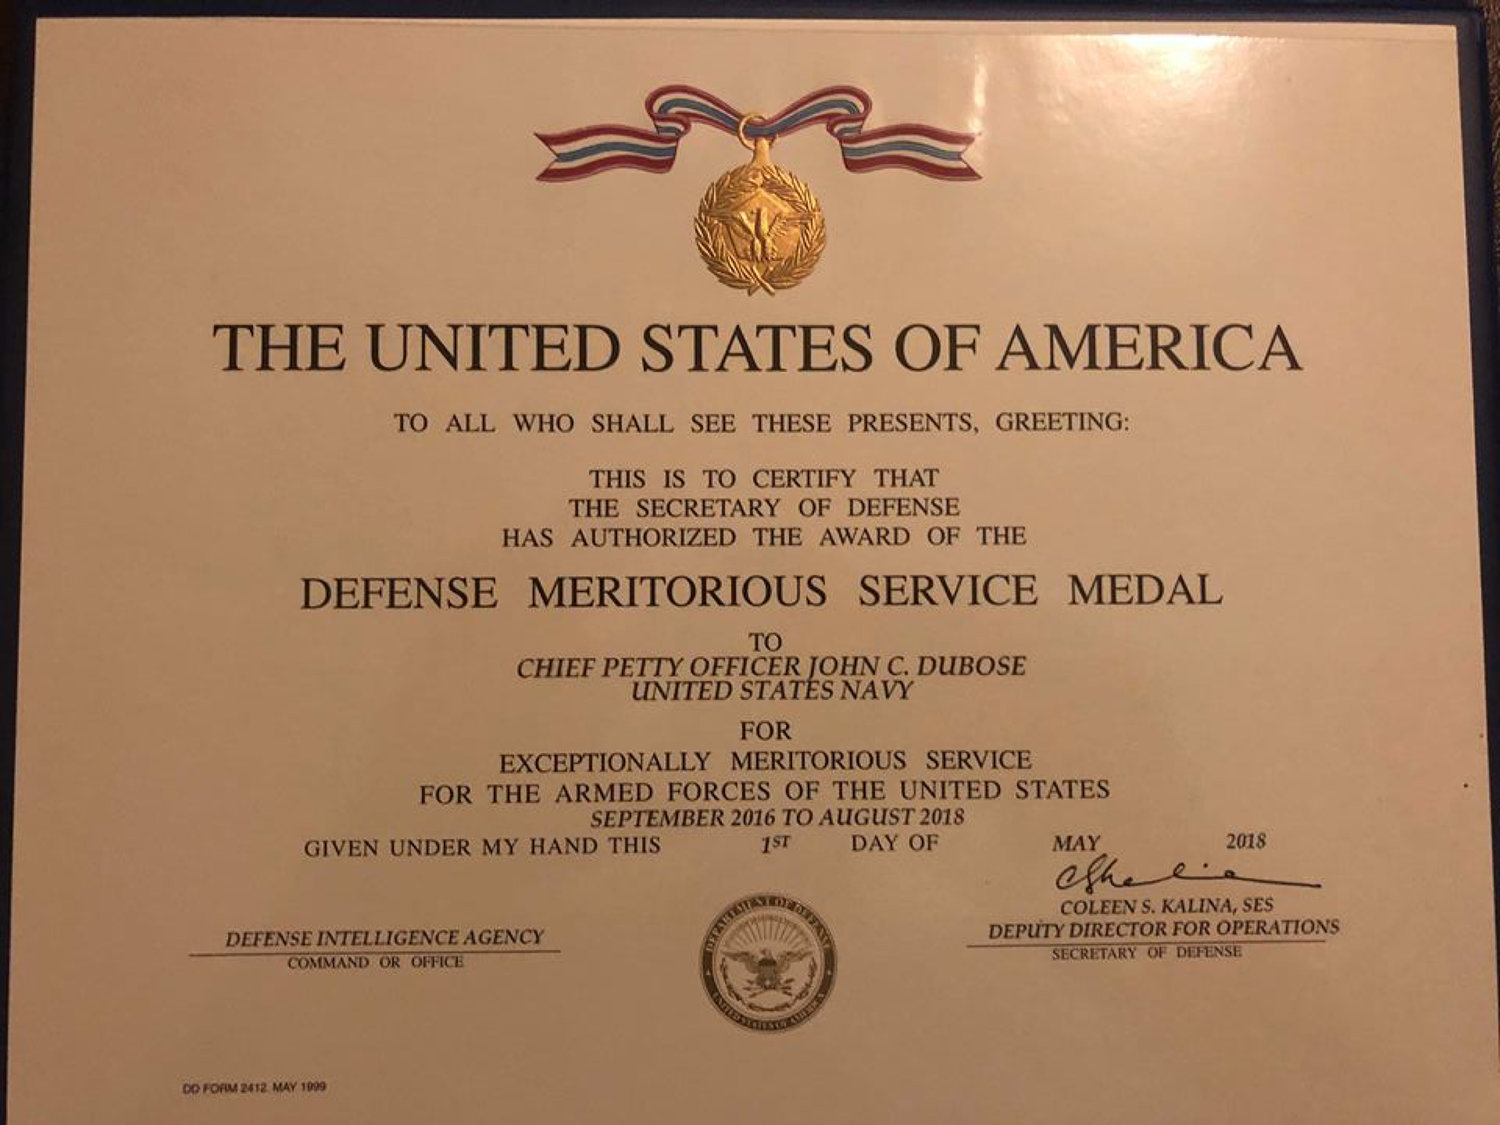 The citation reads in part: “This is to certify that the Secretary of Defense has authorized the award of the Defense Meritorious Service Medal to Chief Petty Officer John C. DuBose, United States Navy, for Exceptionally Meritorious Service for the Armed Forces of the United States September 2016 to May 2018.”